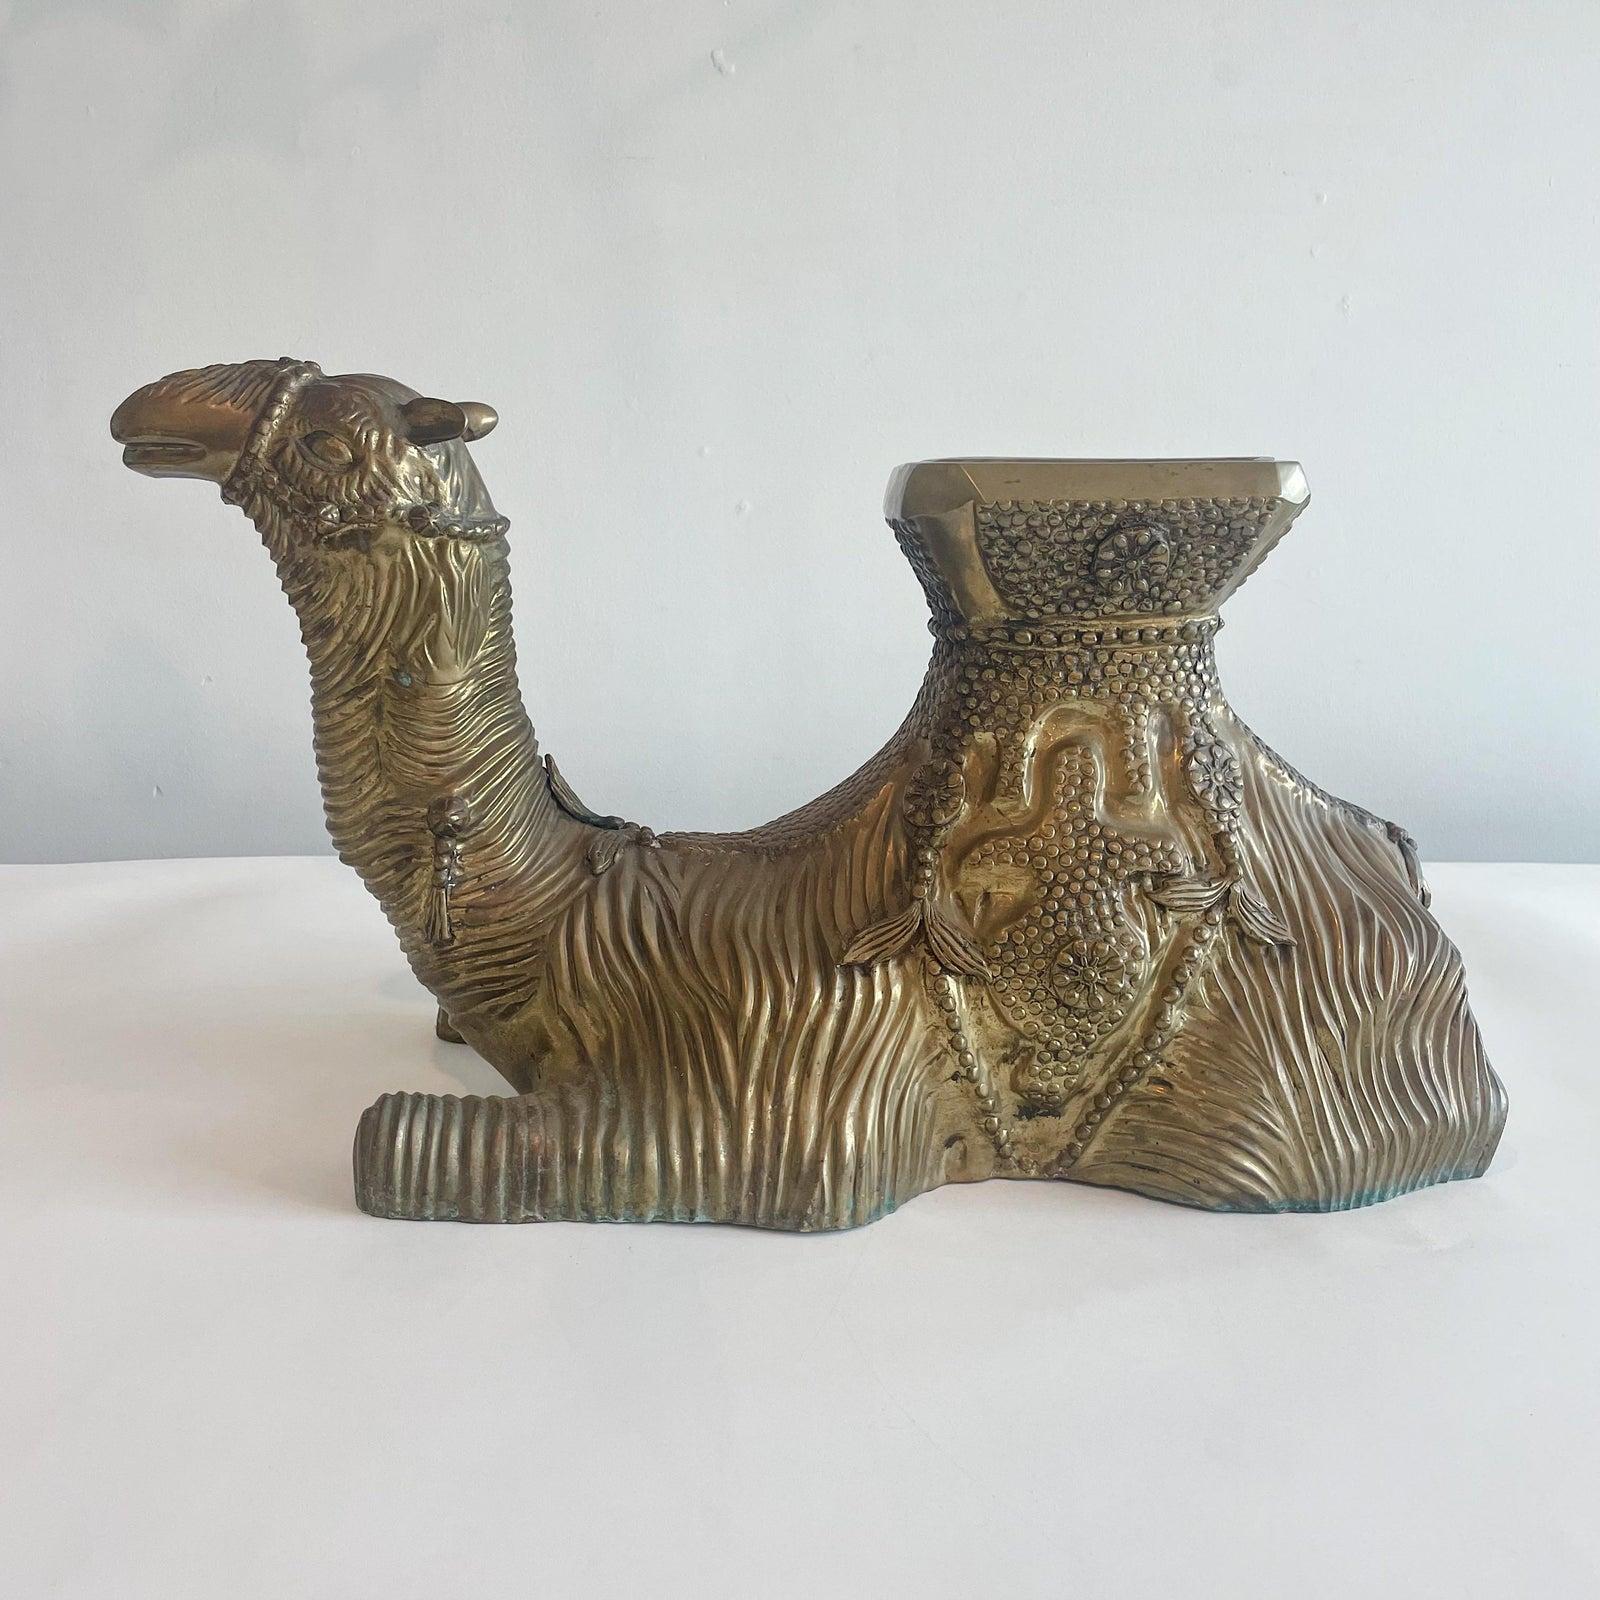 Unusual brass camel seat or small table. This can accommodate a small piece of glass to make it an occasional table. Unsigned.